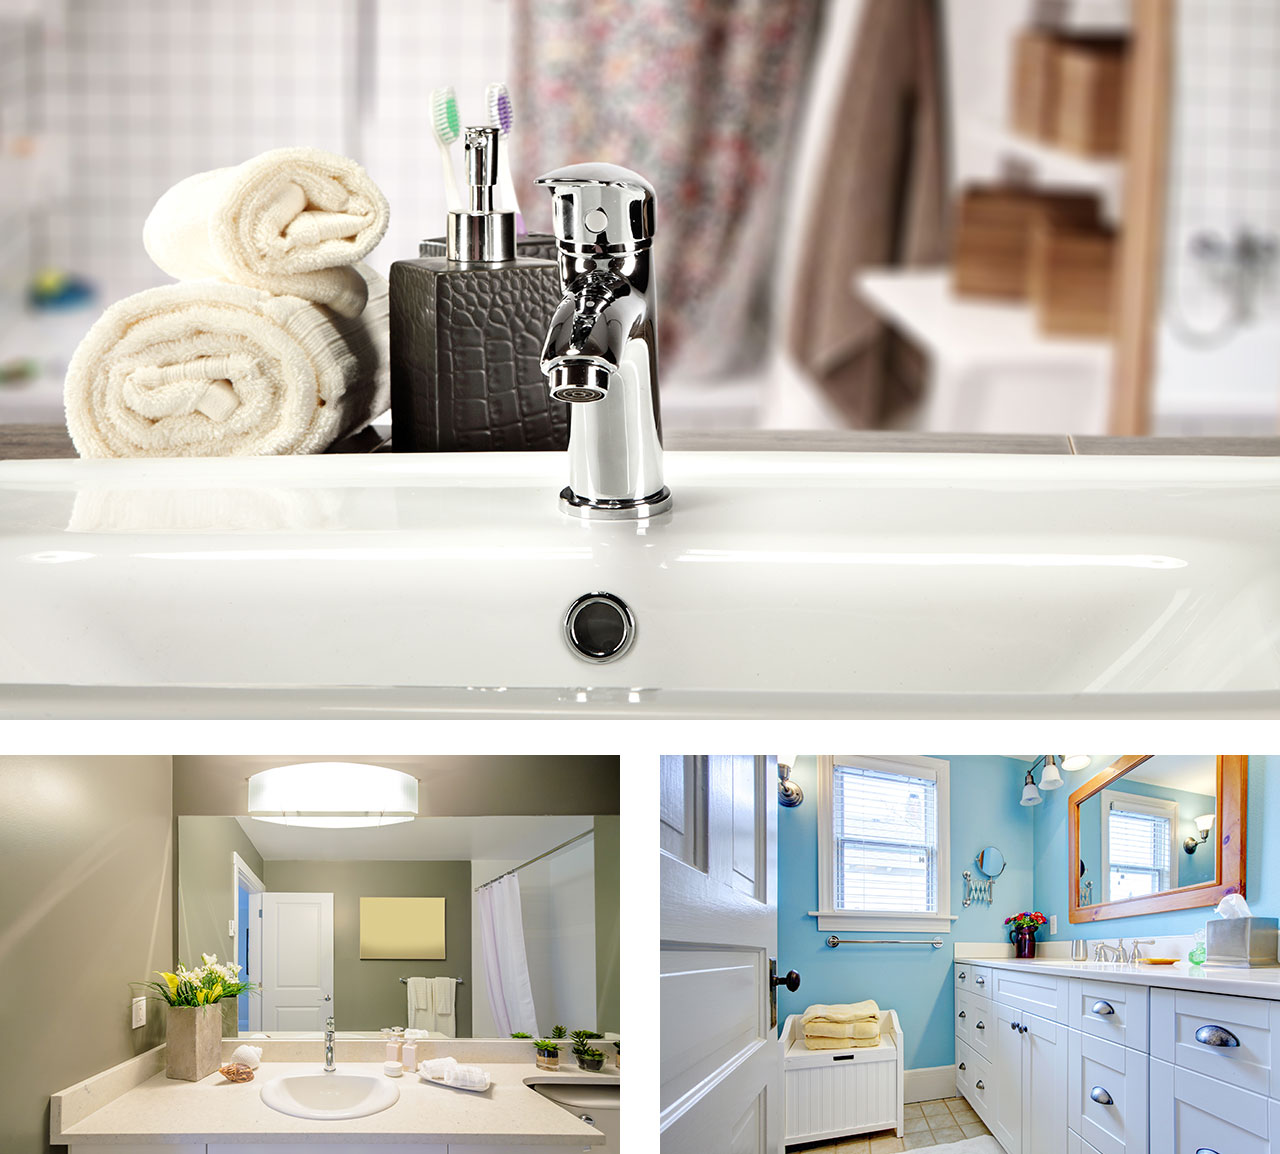 5-ways-to-revamp-your-bathroom-without-a-whole-remodeling-job-content